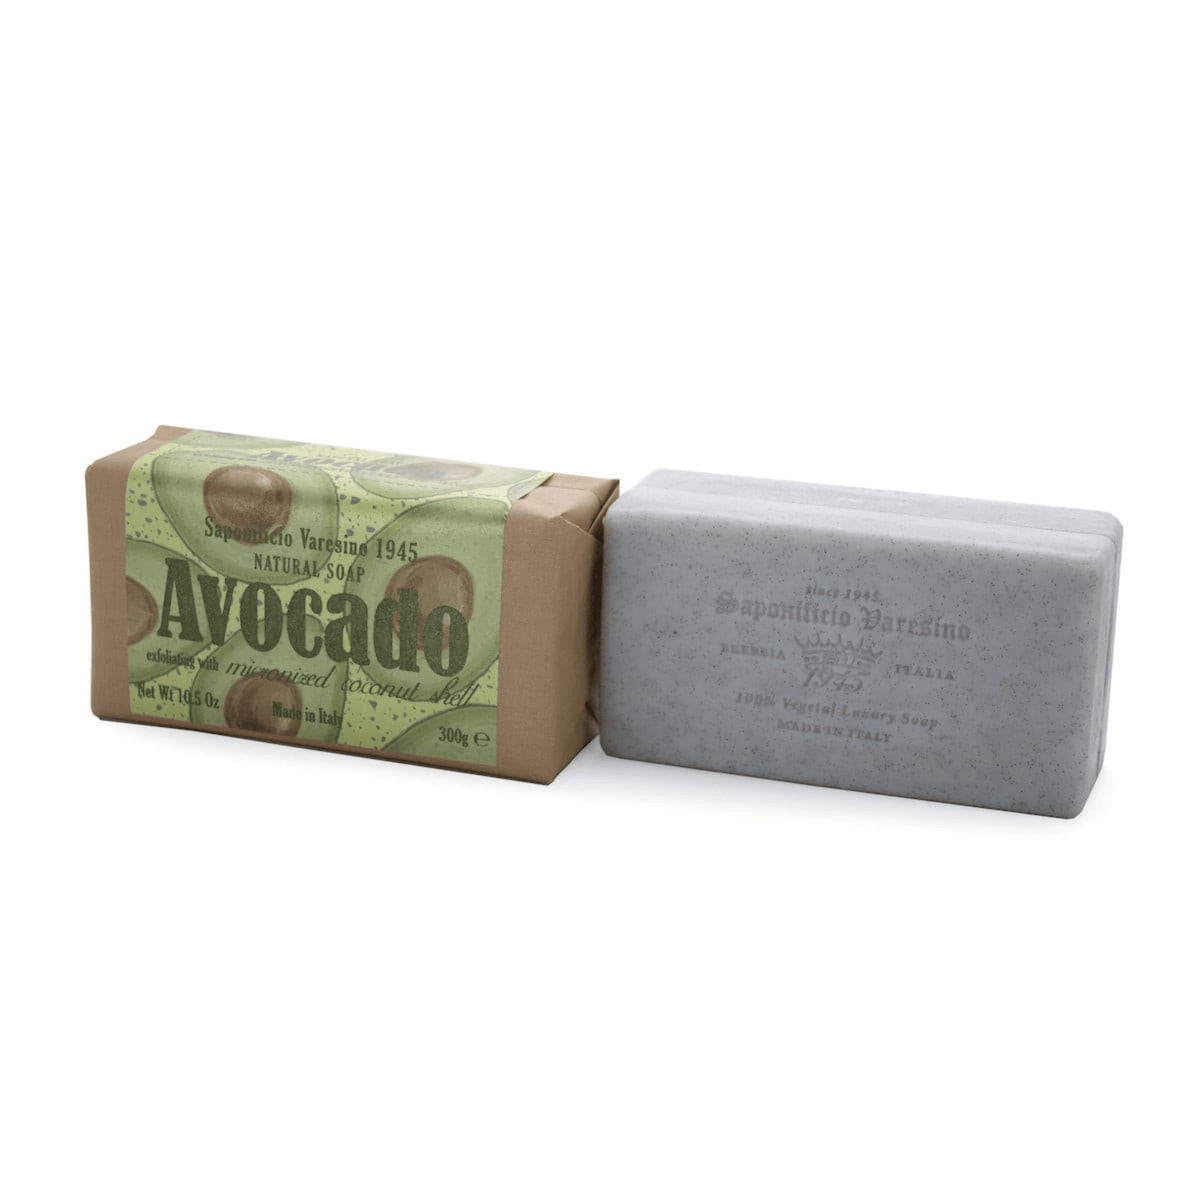 Primary Image of Avocado Soap with Coconut Shell